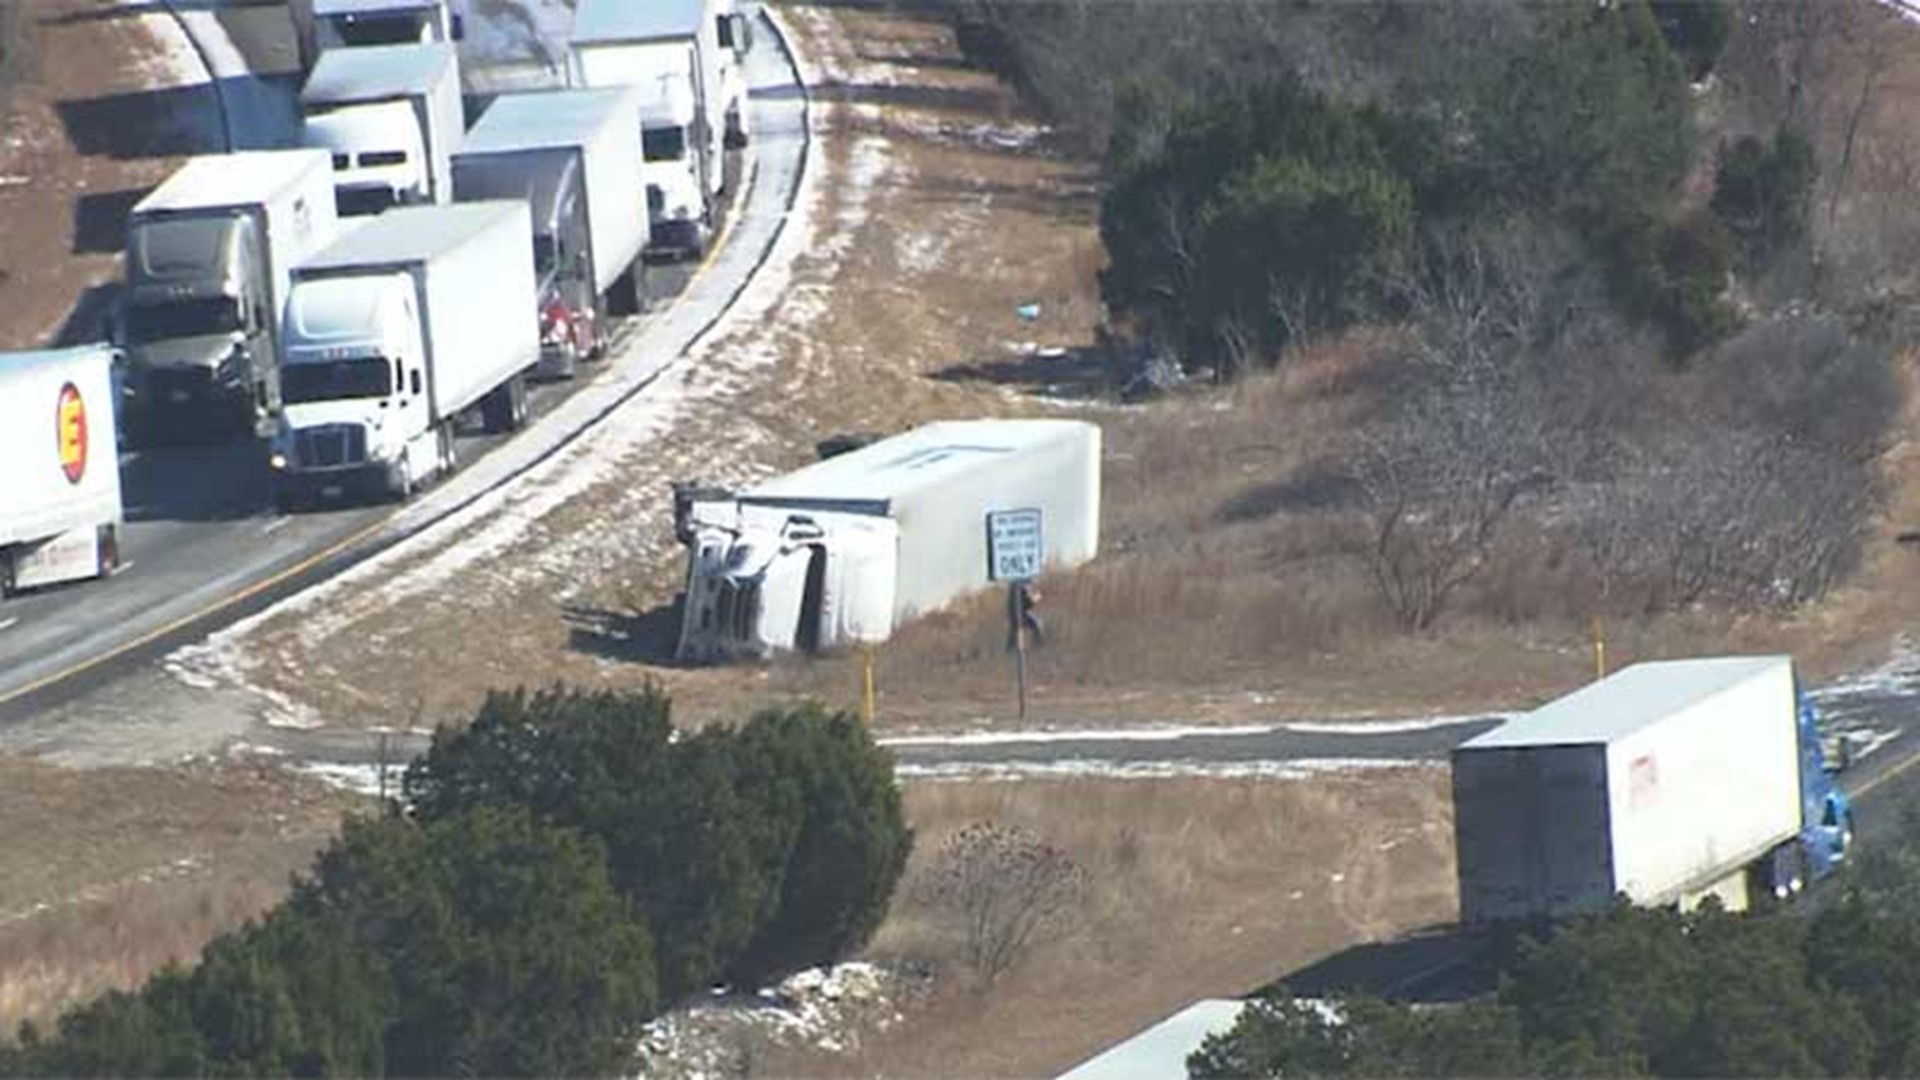 Miles of trucks and cars were stuck for hours on Interstate 10 near Kerrville after a couple of crashes blocked the highway in icy conditions.